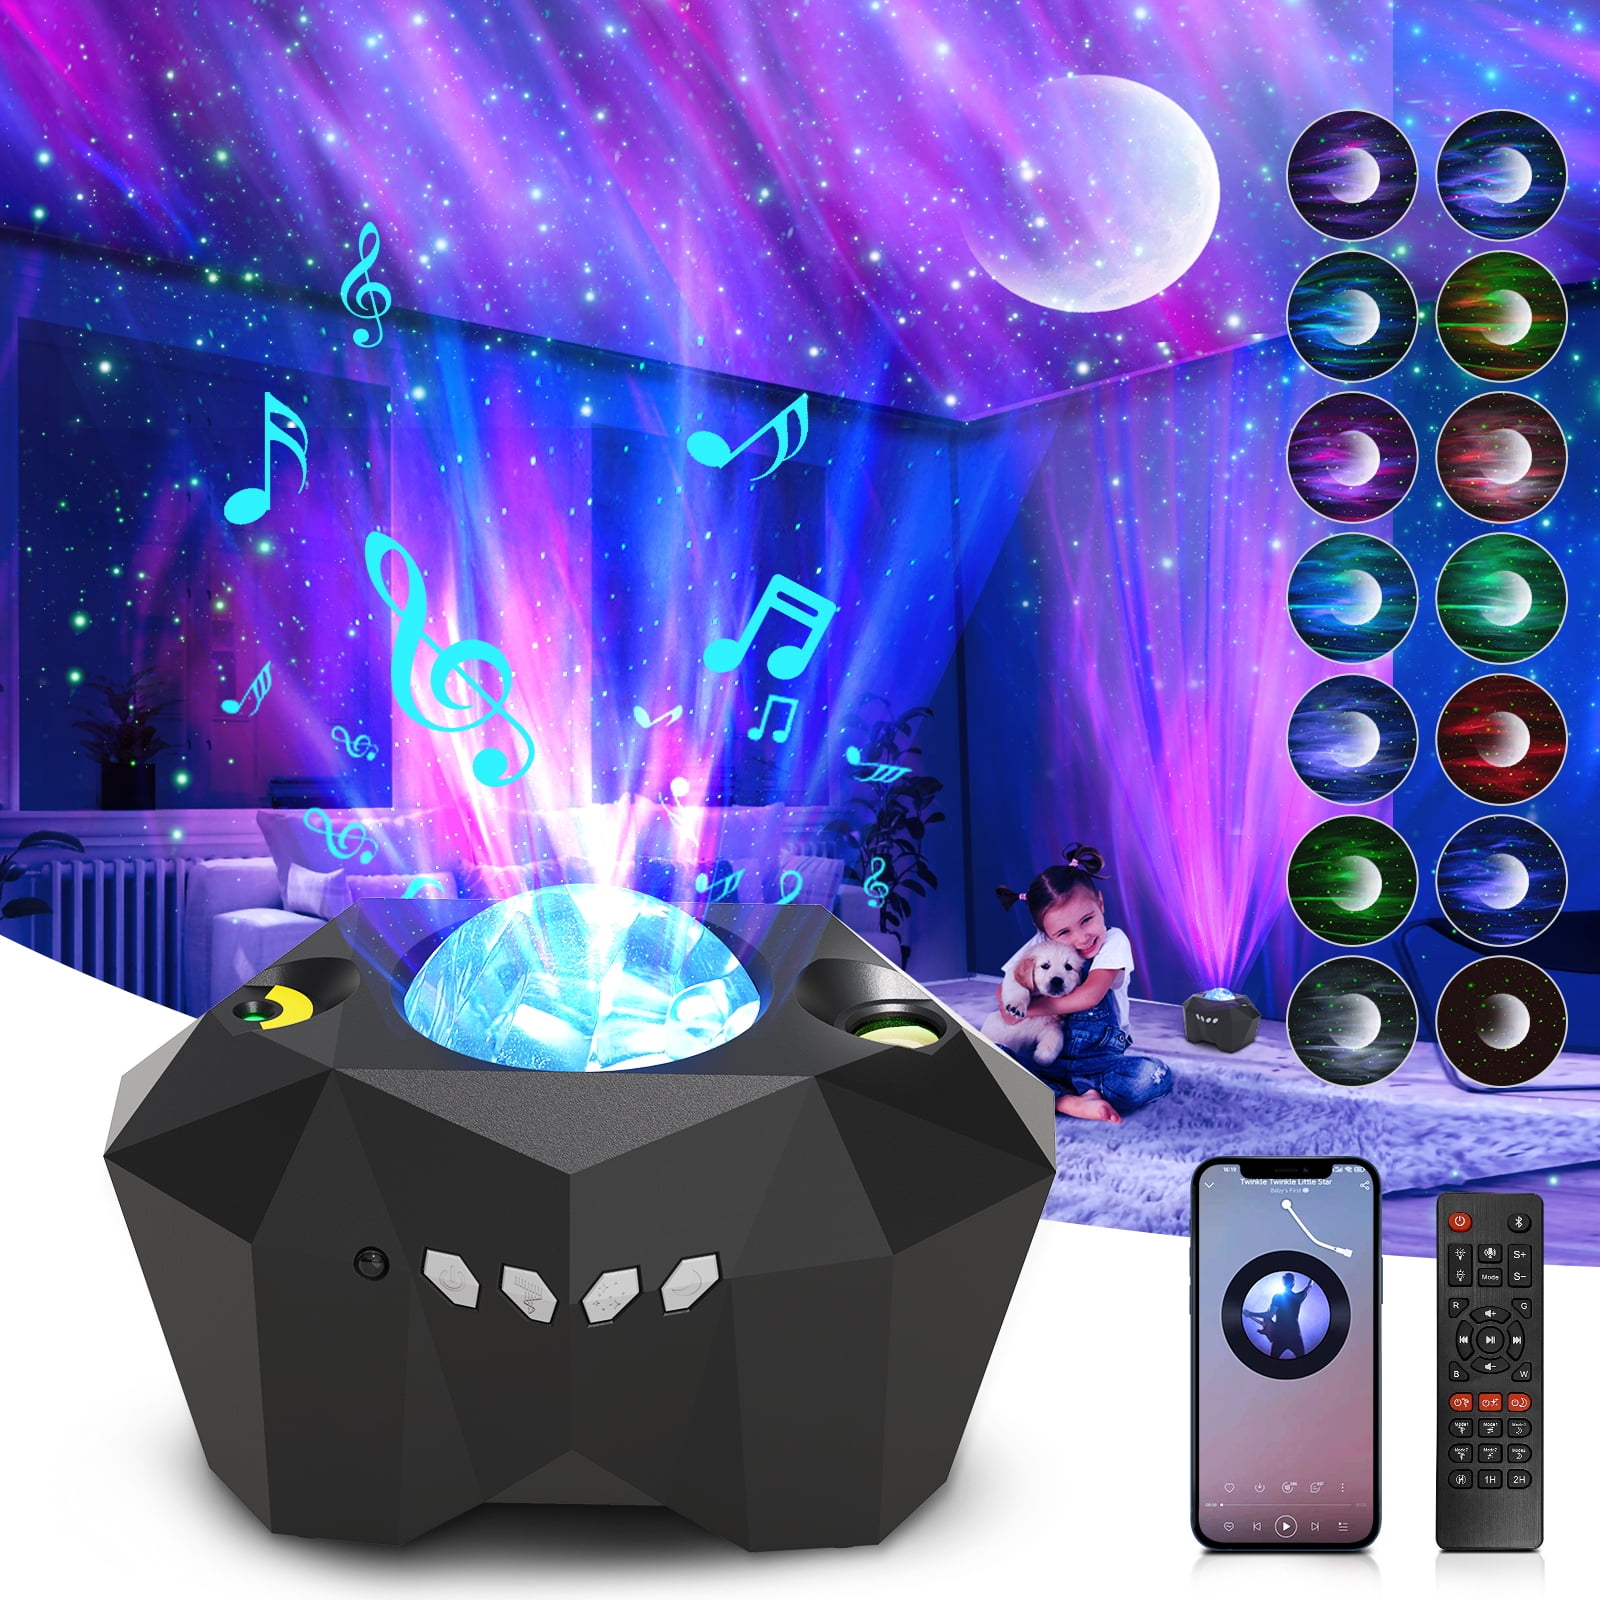 Galaxy Projector Star Projector, White Noise Bluetooth Speakers Night Light  Timer Remote Control, Room Decor for Teen Girls/Led Lights for Bedroom